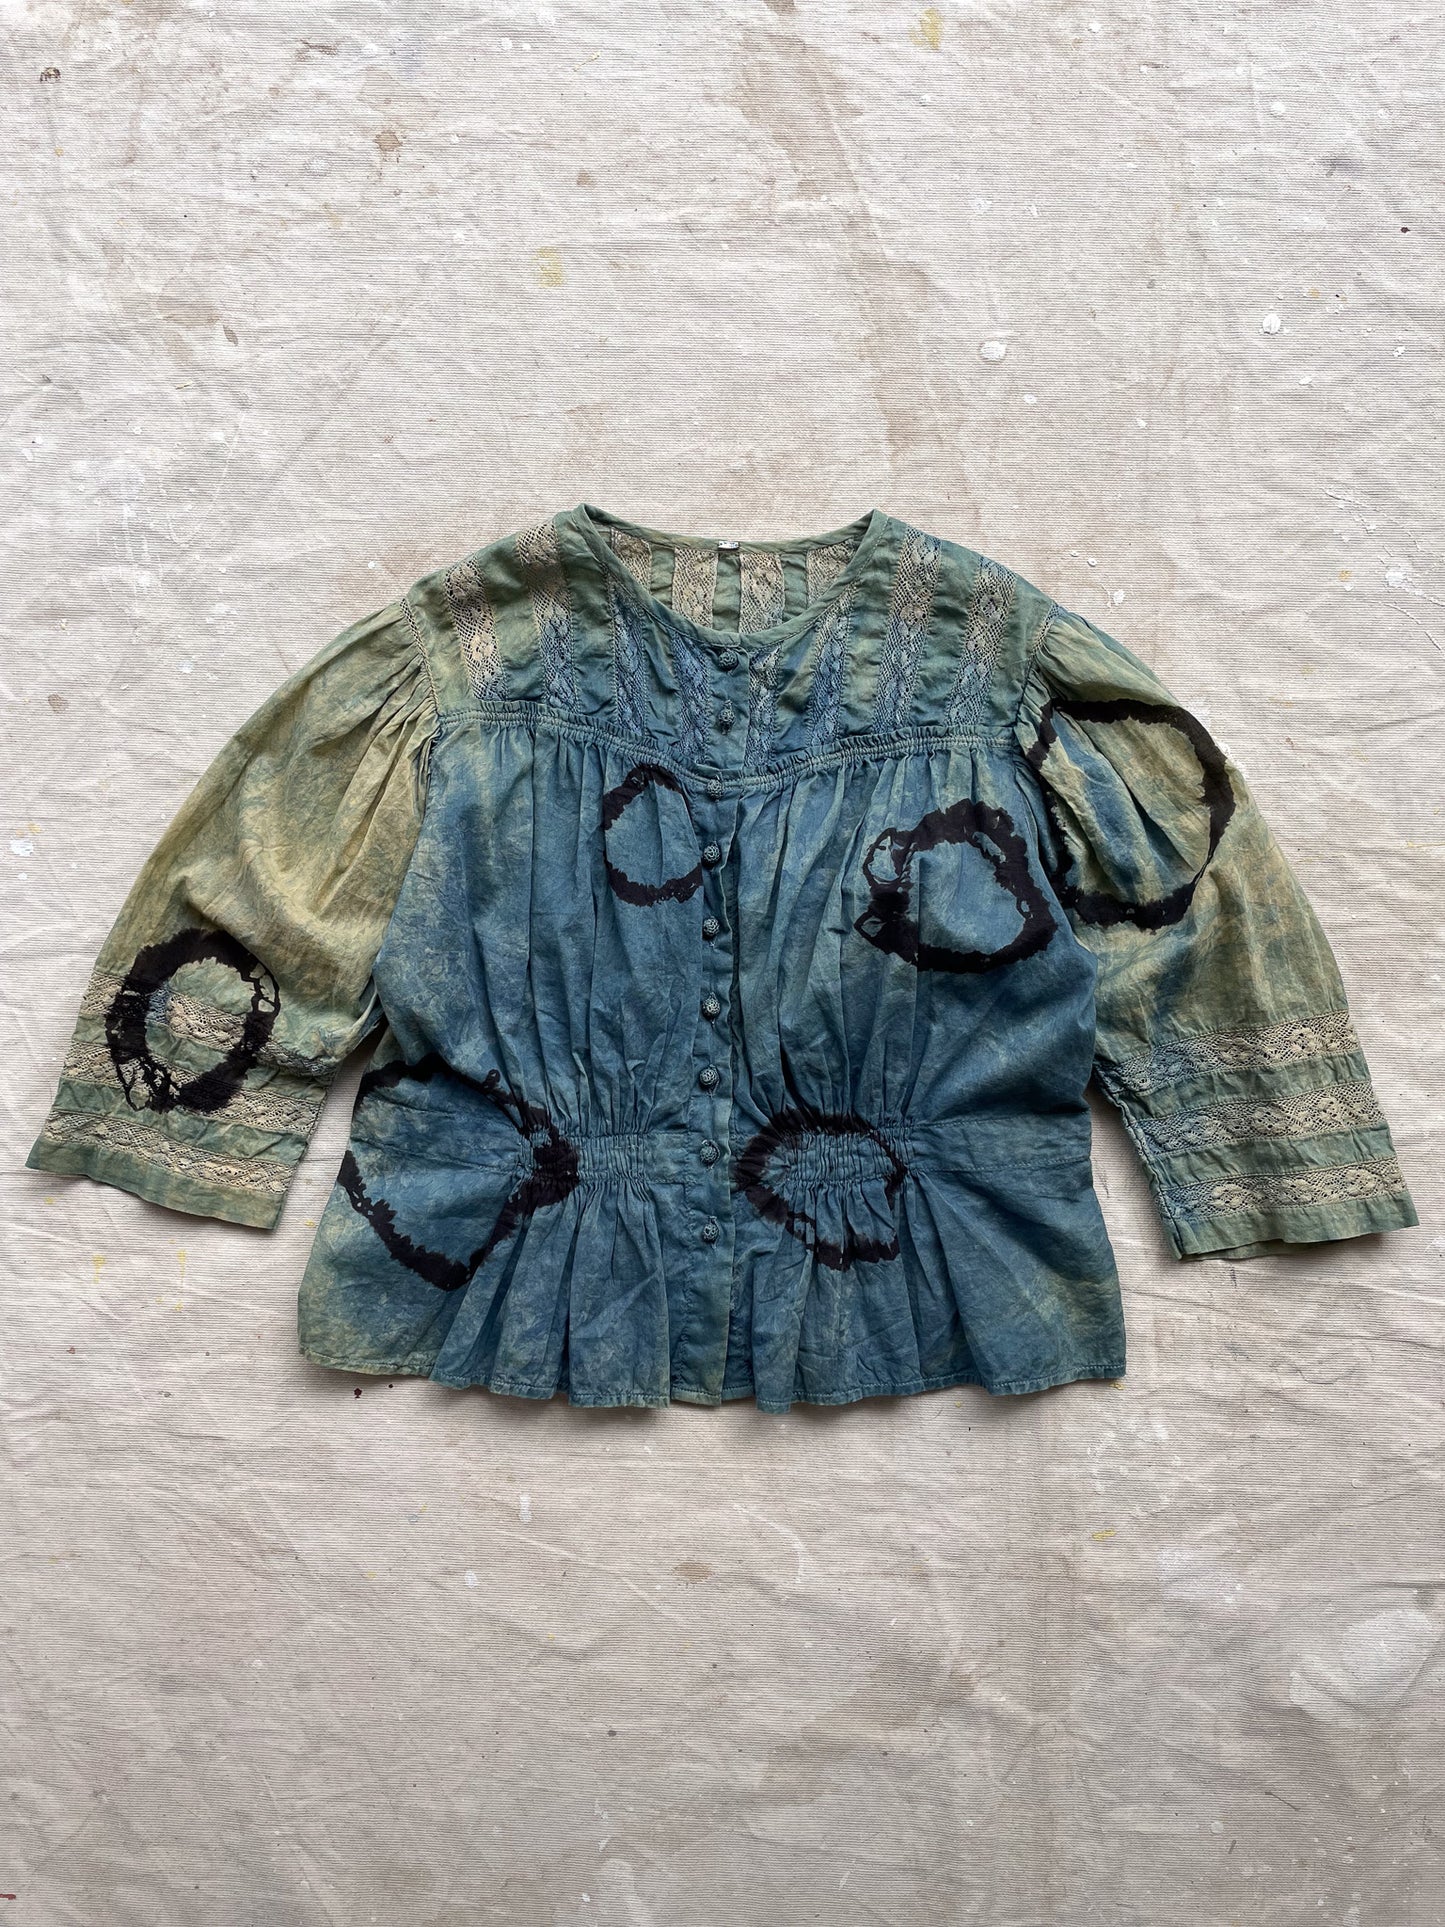 MIMI PROBER HAND DYED ANTIQUE BLOUSE [S]